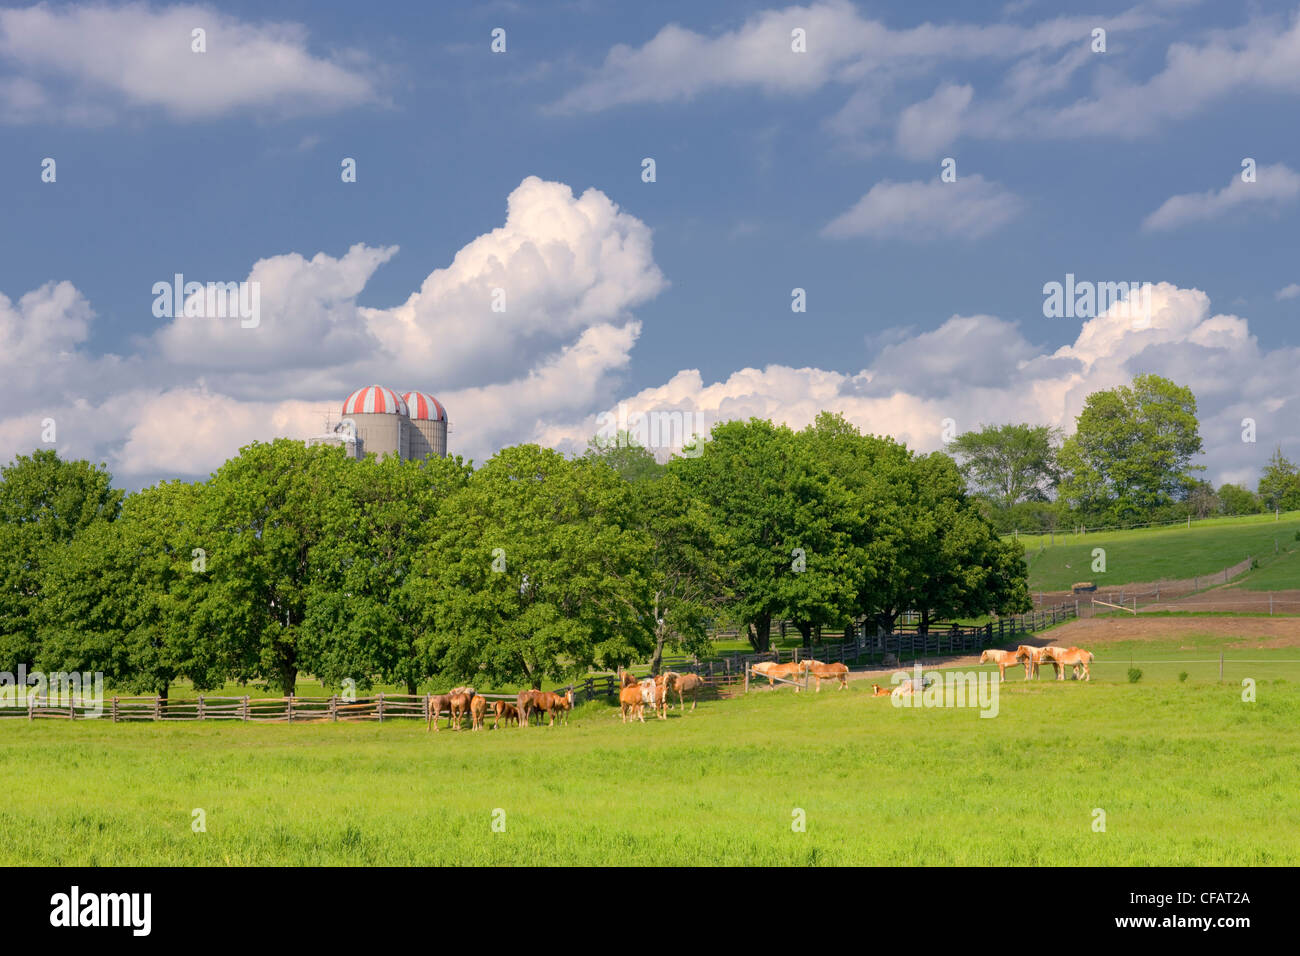 Haflinger horses with silos in the background, Sidney, Ontario, Canada. Stock Photo